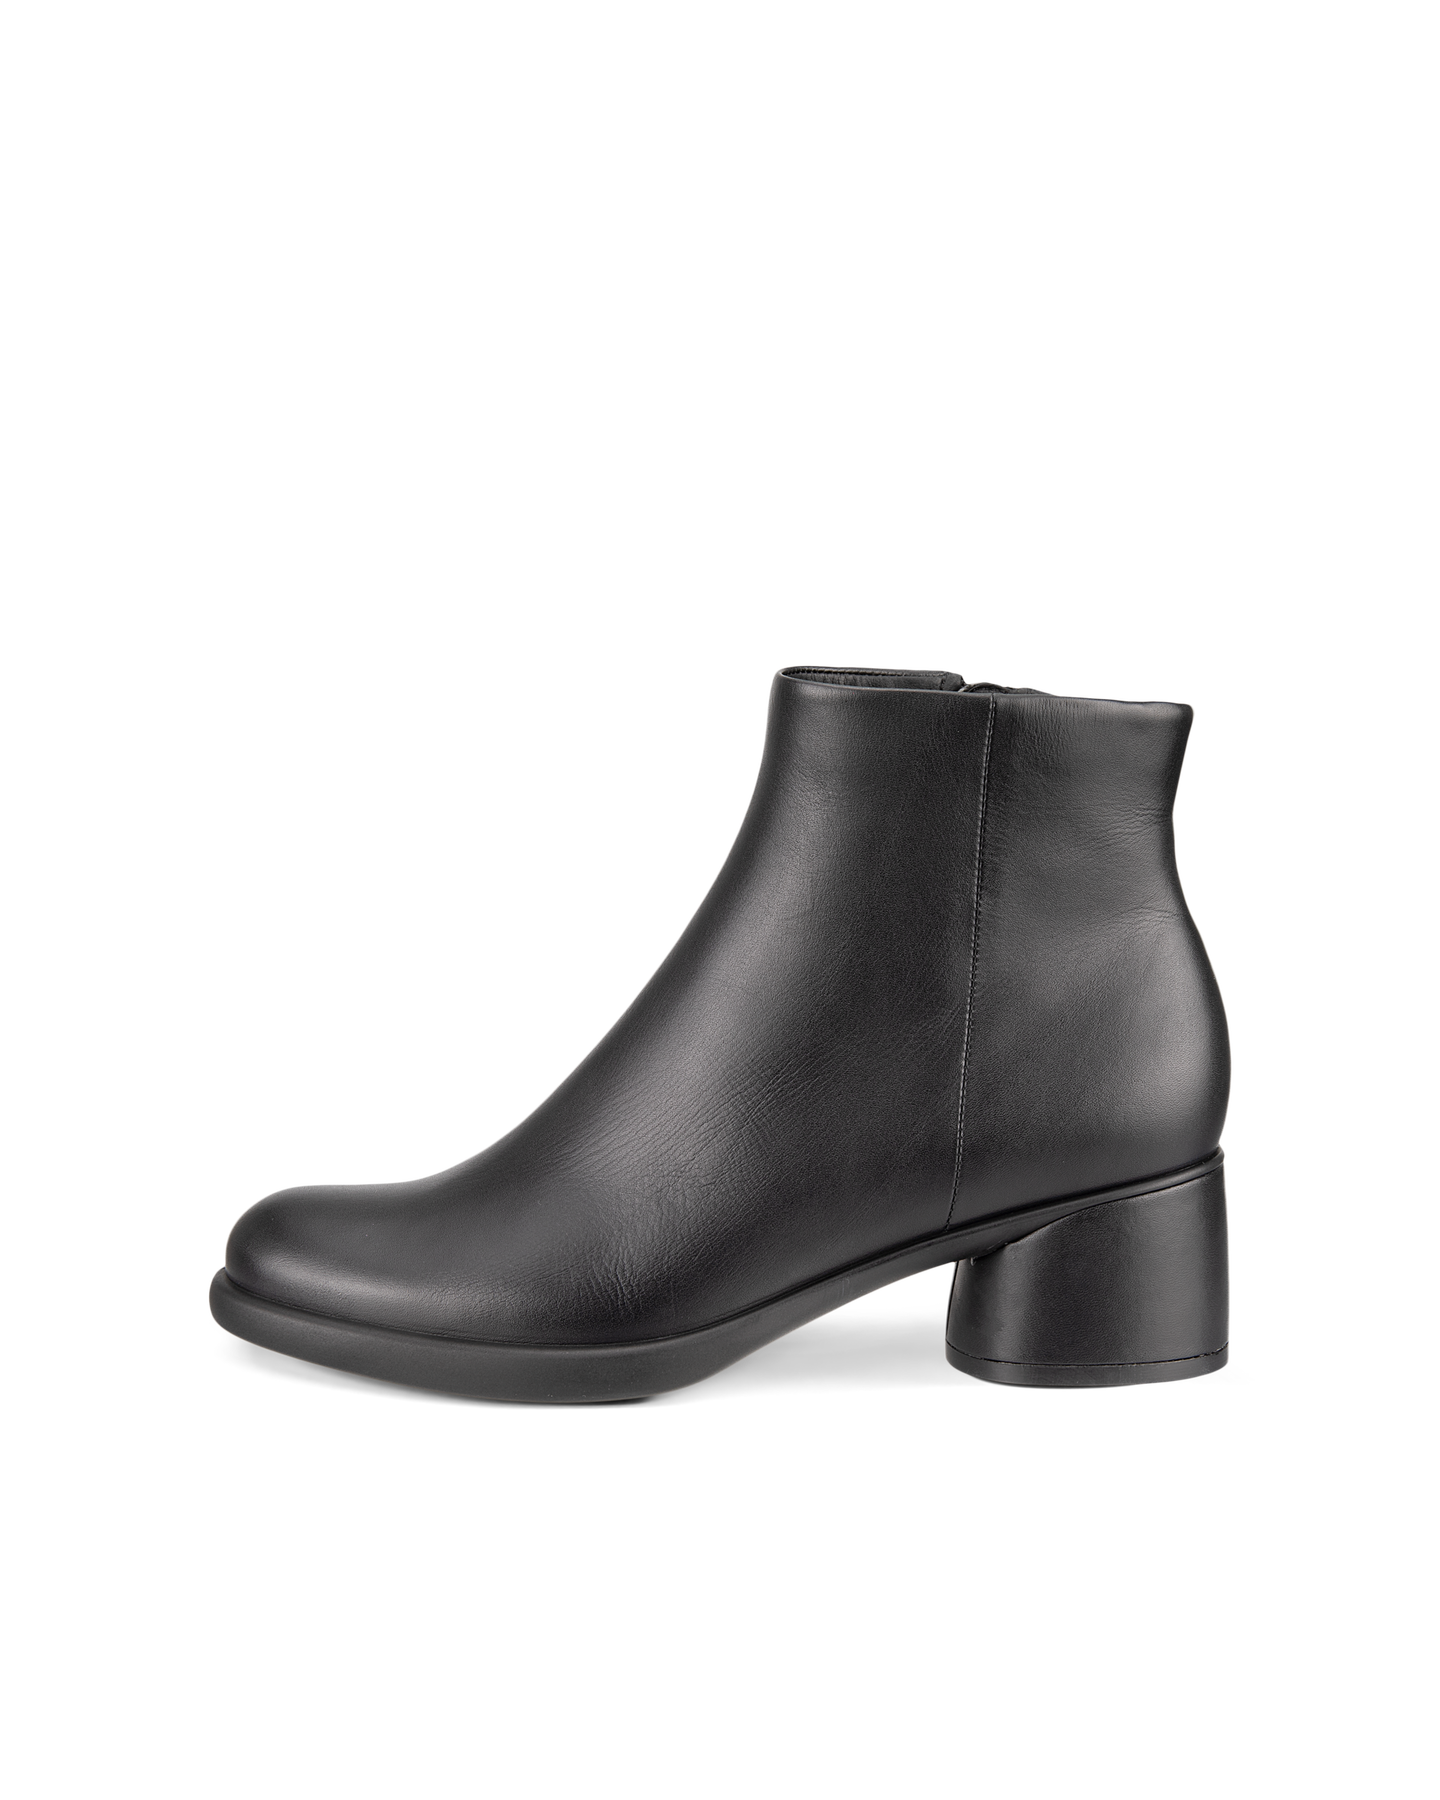 UPC 194891337441 product image for ECCO Women's Sculpted Lx 35 Ankle Boot Size 6 Leather Black | upcitemdb.com